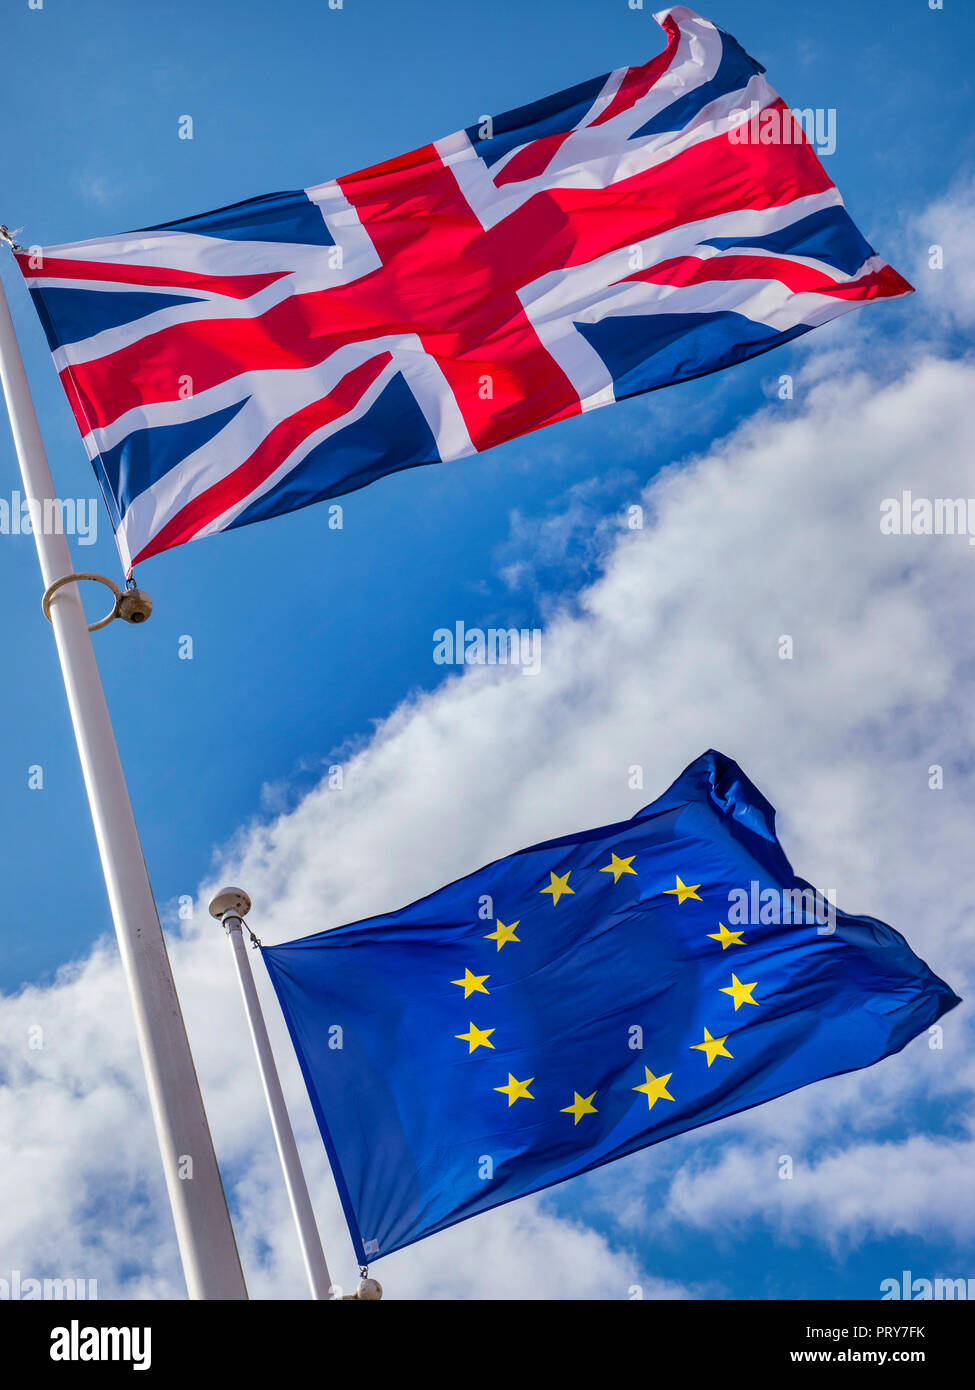 BREXIT FLAGS CONCEPT UK Union Jack Flag flying high above EU European Flag in a stiff breeze on a sunlit day with blue sky & flags divided by clouds Stock Photo